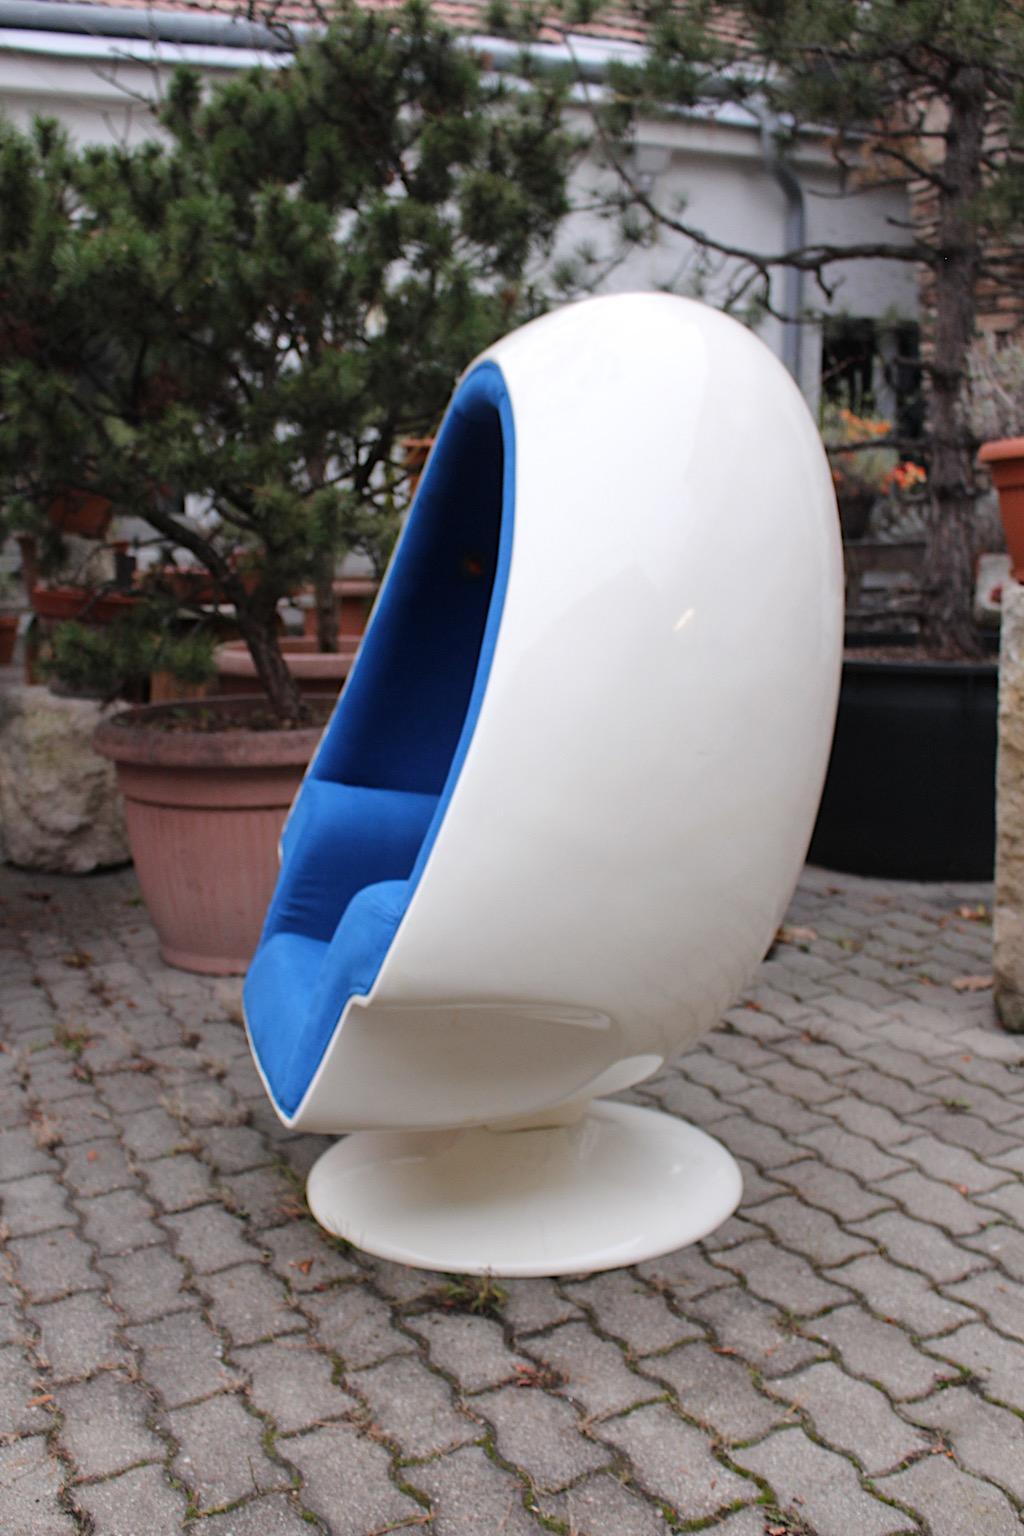 Space Age White Blue Vintage Swiveling Fiberglass Egg Lounge Chair, 1970s, USA For Sale 1